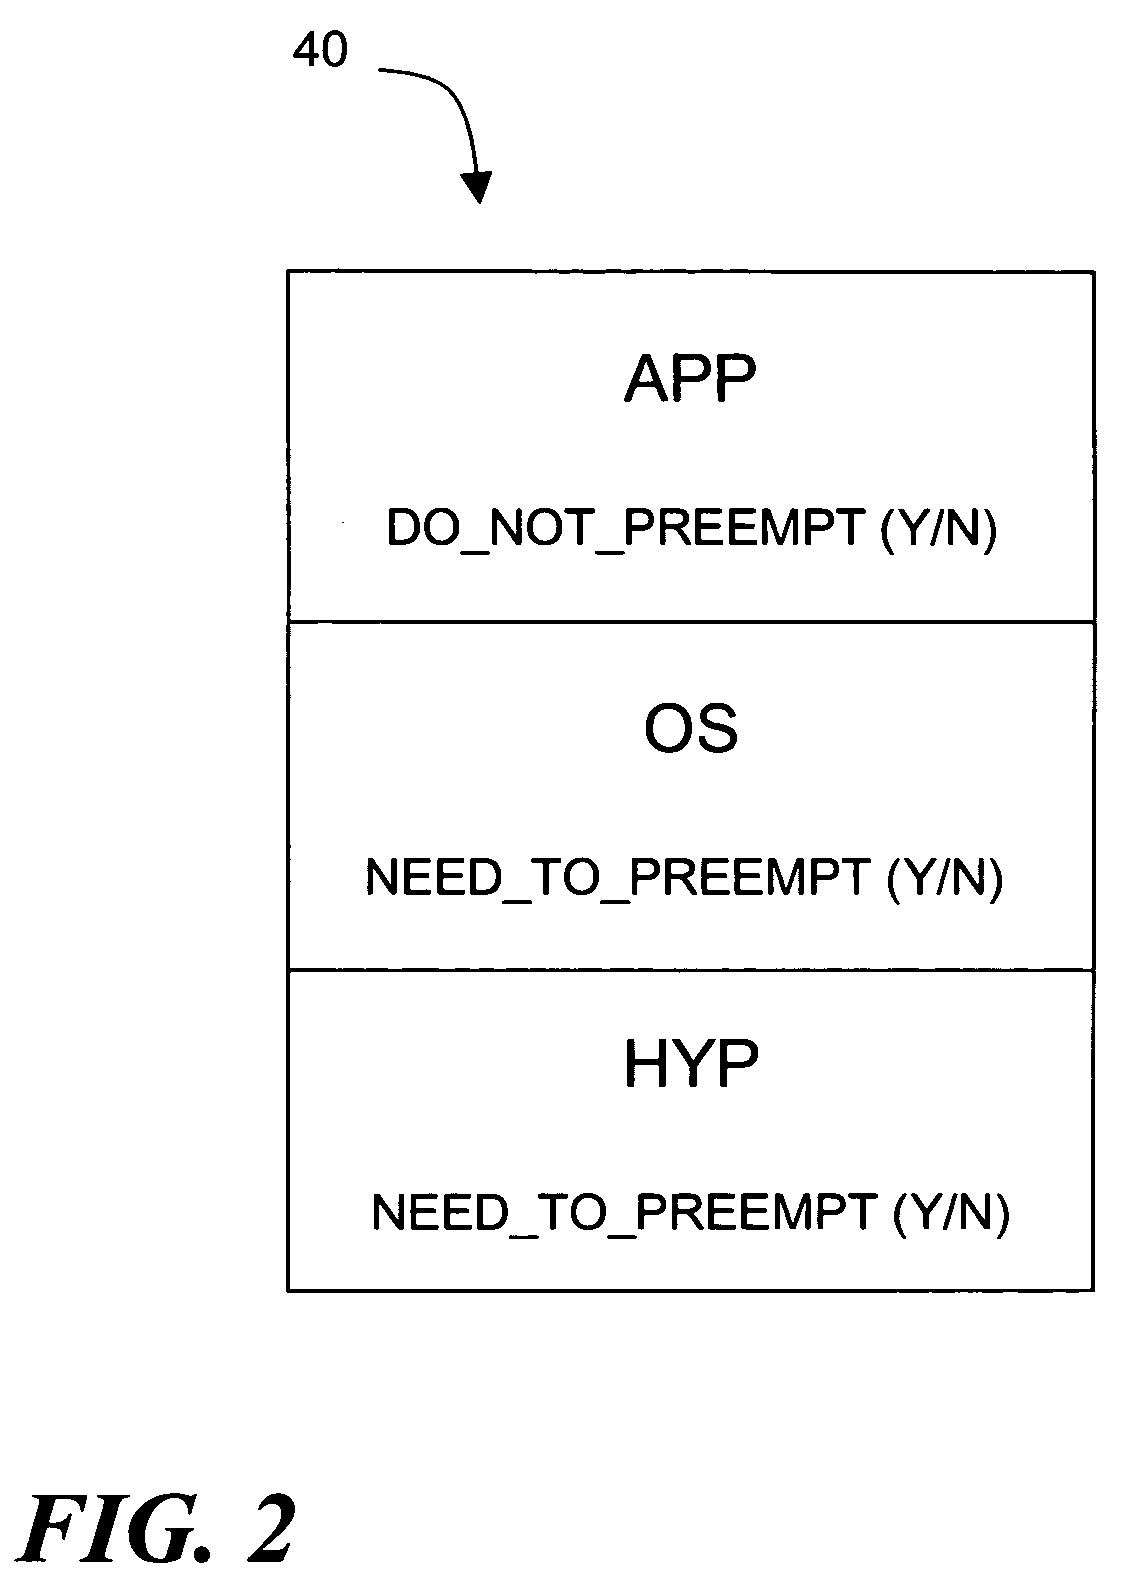 Efficient sharing of memory between applications running under different operating systems on a shared hardware system